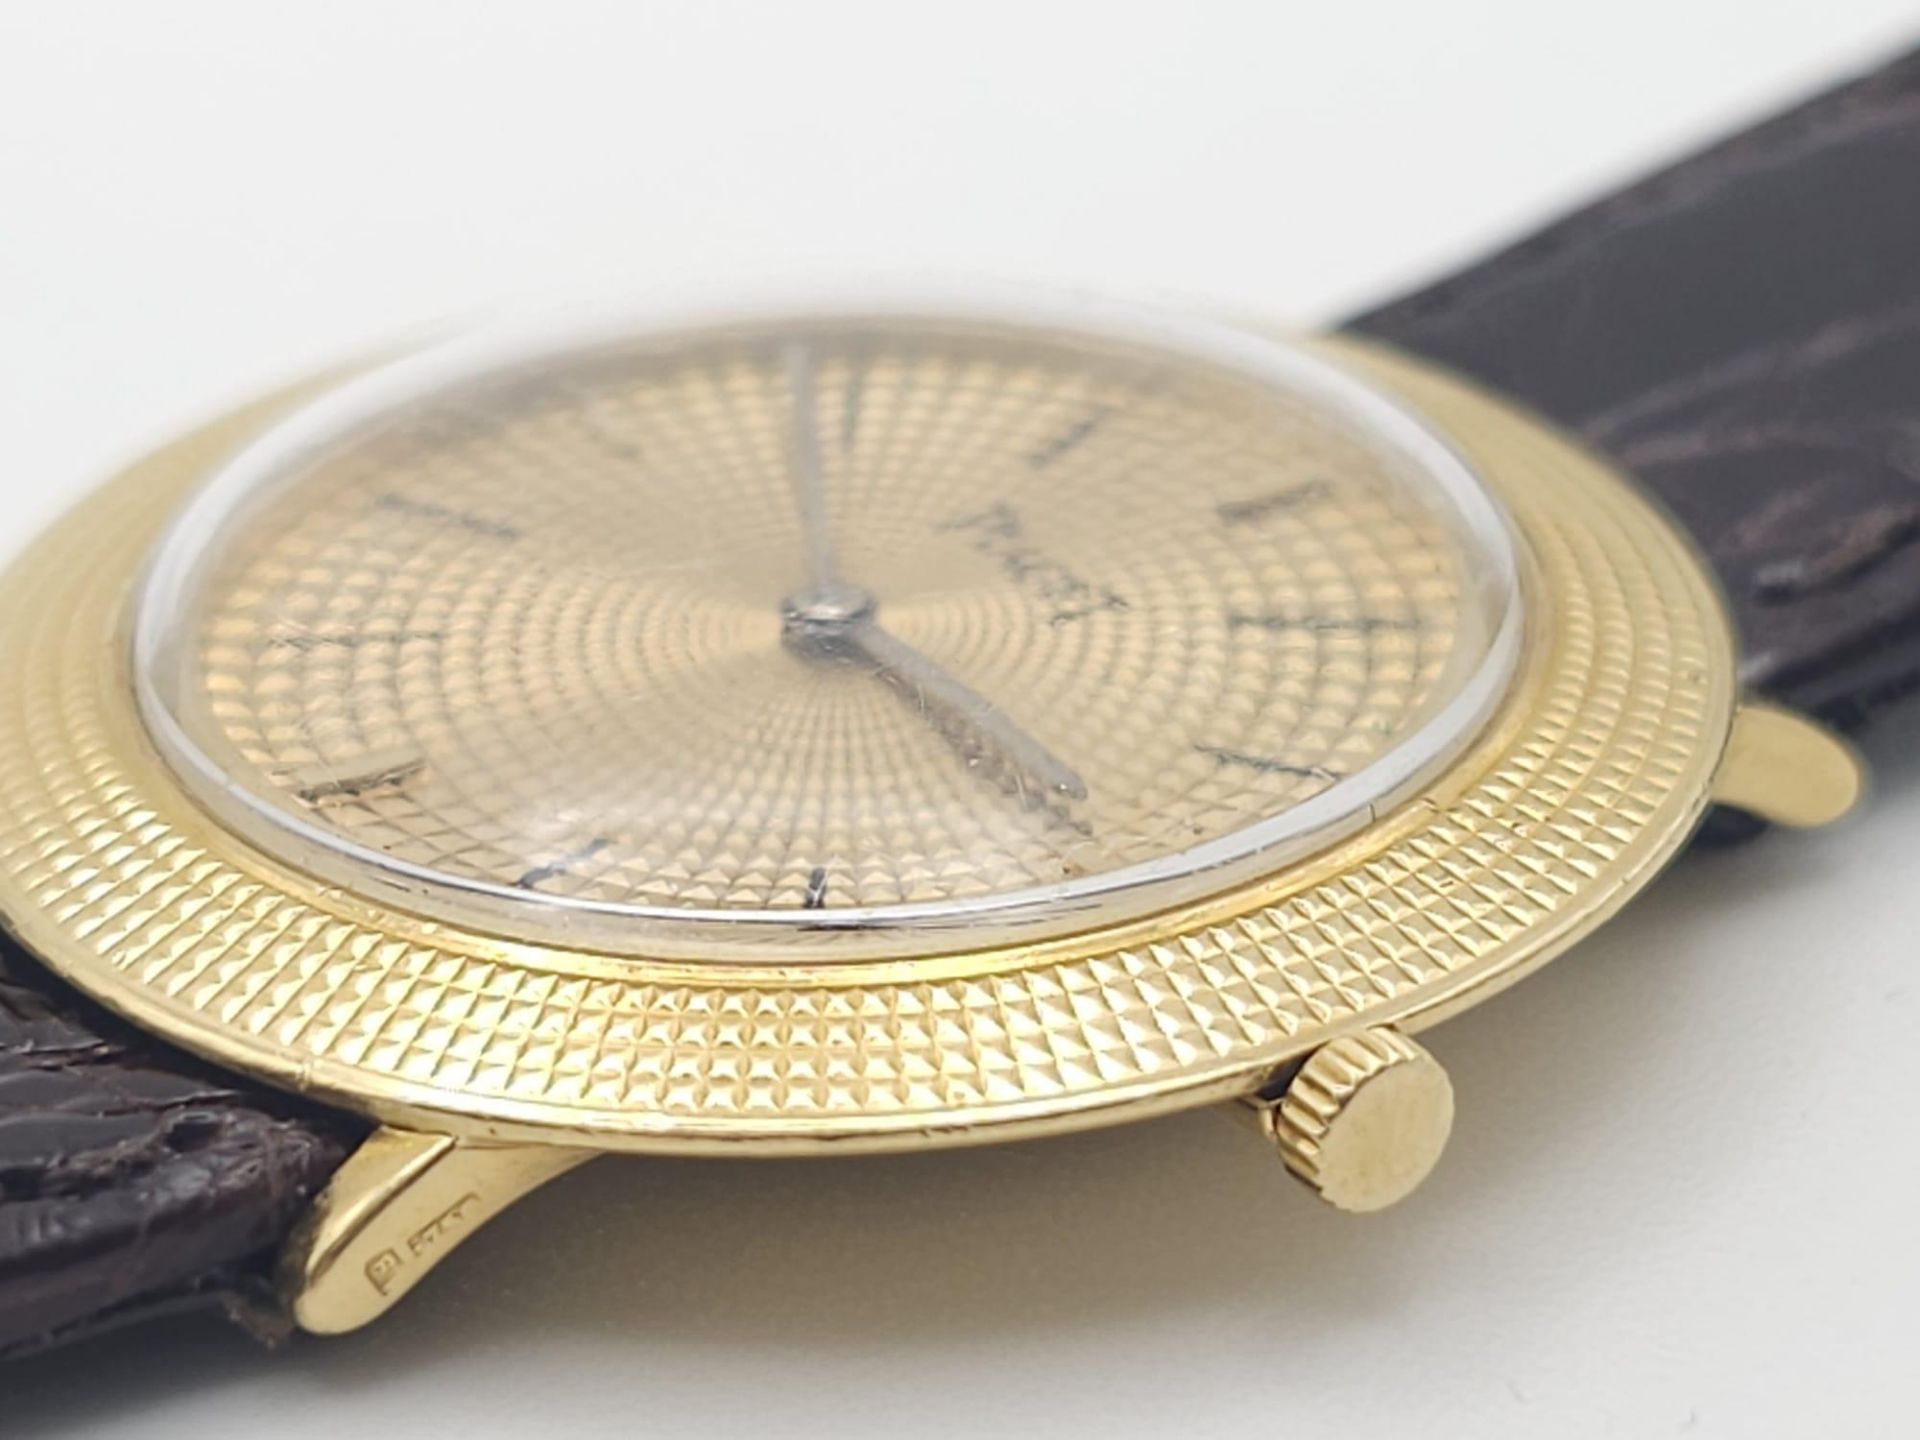 A Vintage 18K Gold Piaget Gents Watch with Hypnotic Dial. Brown crocodile strap. 18k gold case - - Image 20 of 25